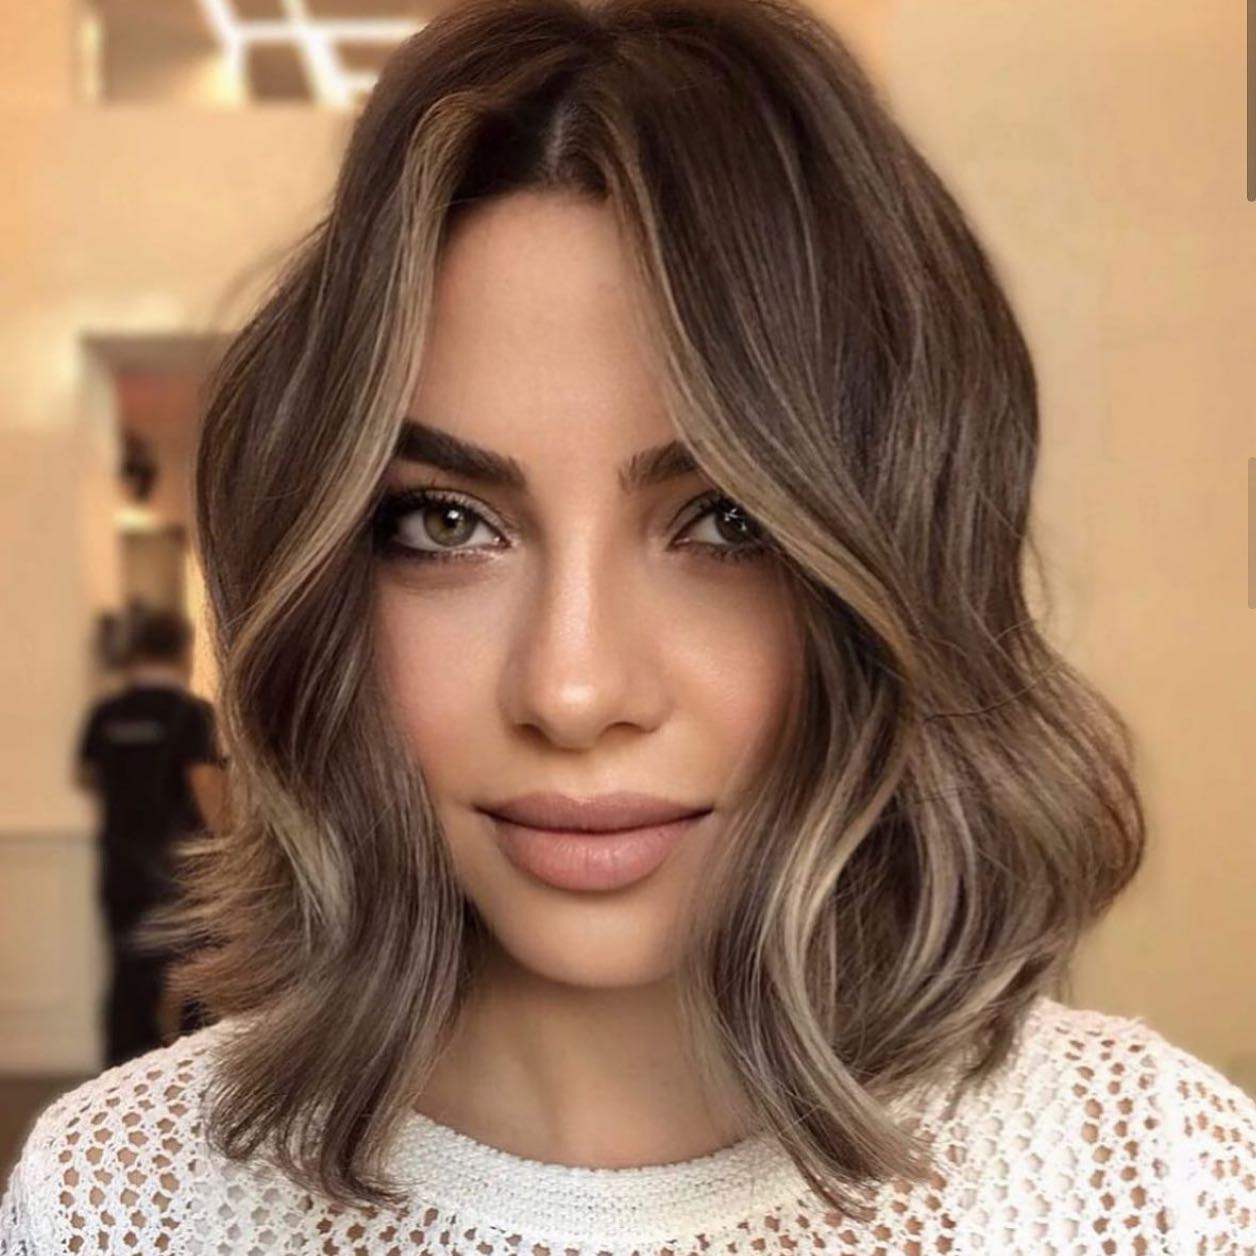 30+ Long Hairstyles And Haircuts For Long Hair To Try In 2022 images 20